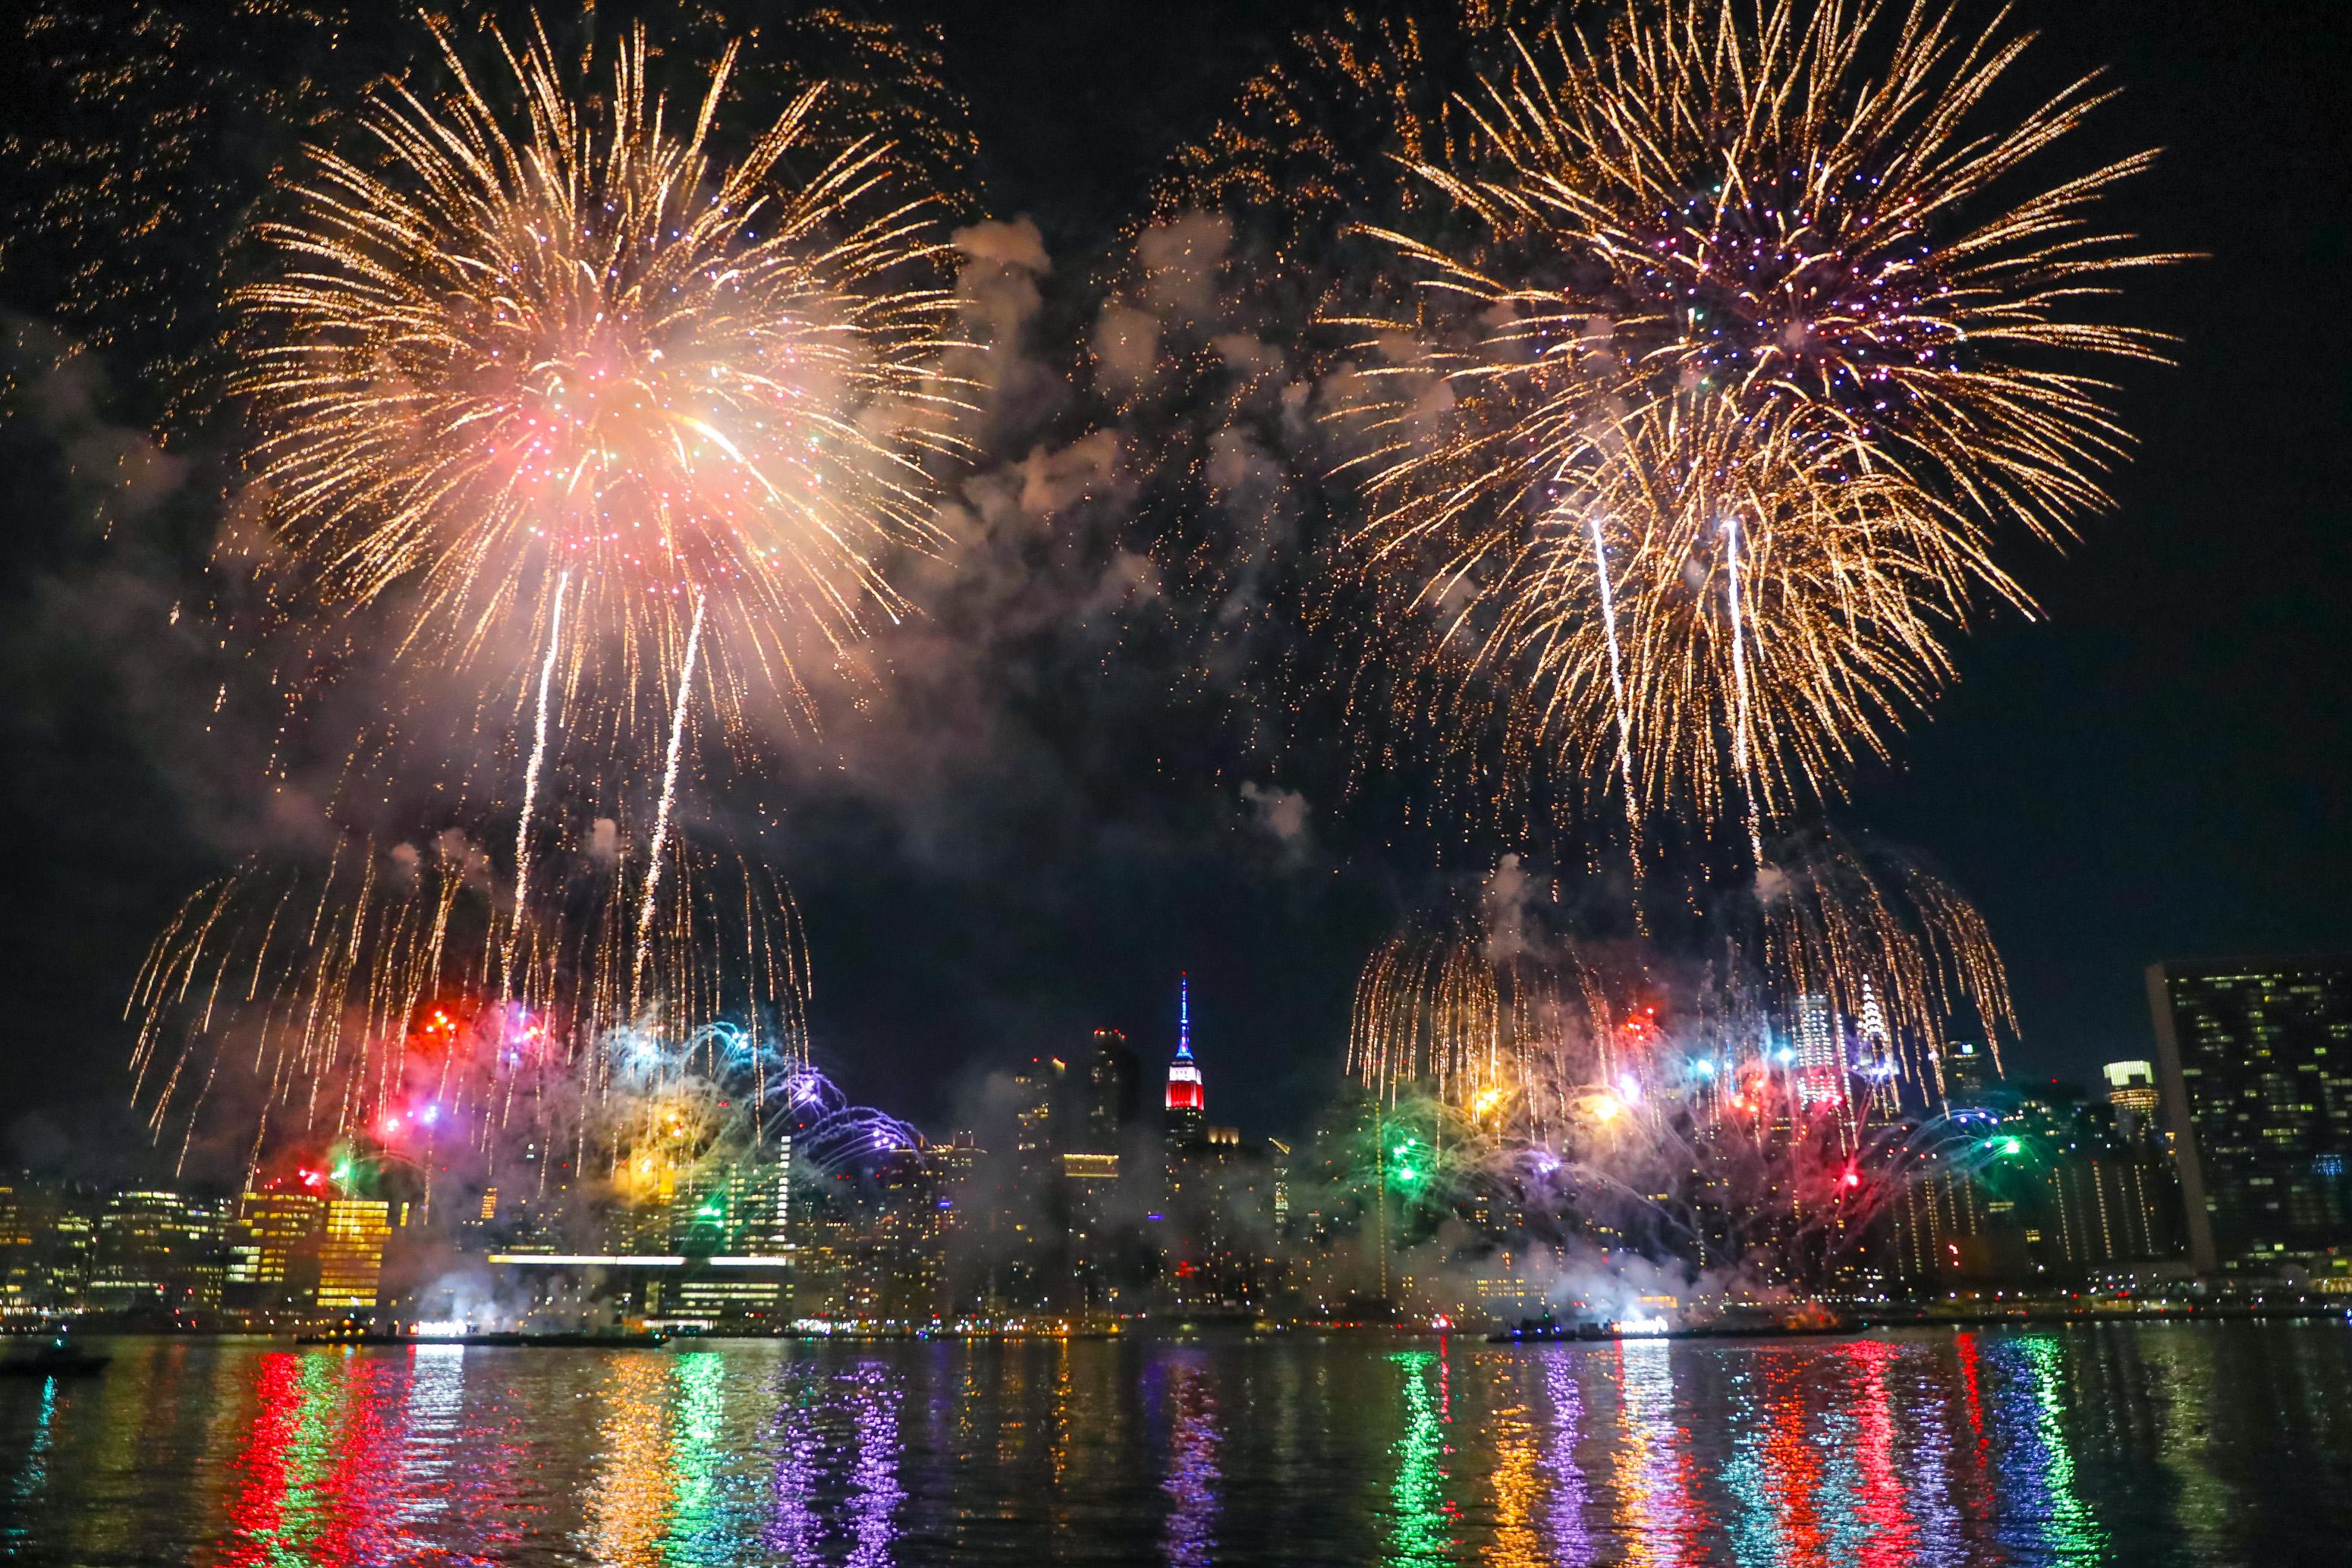 Jordan Dabby Previews The 2021 Macy's 4th of July Fireworks